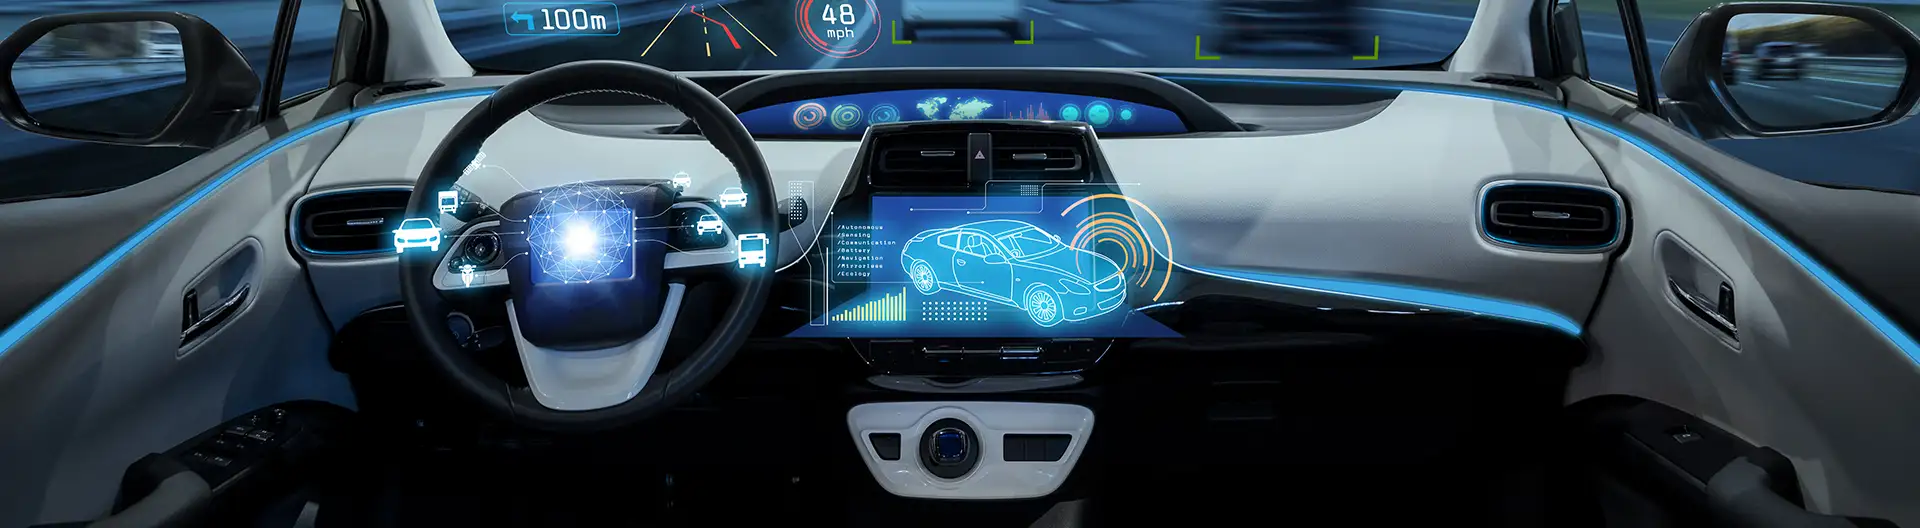 How to Ensure Automotive Cybersecurity in the Next-Gen Vehicles [Part 2] - Banner